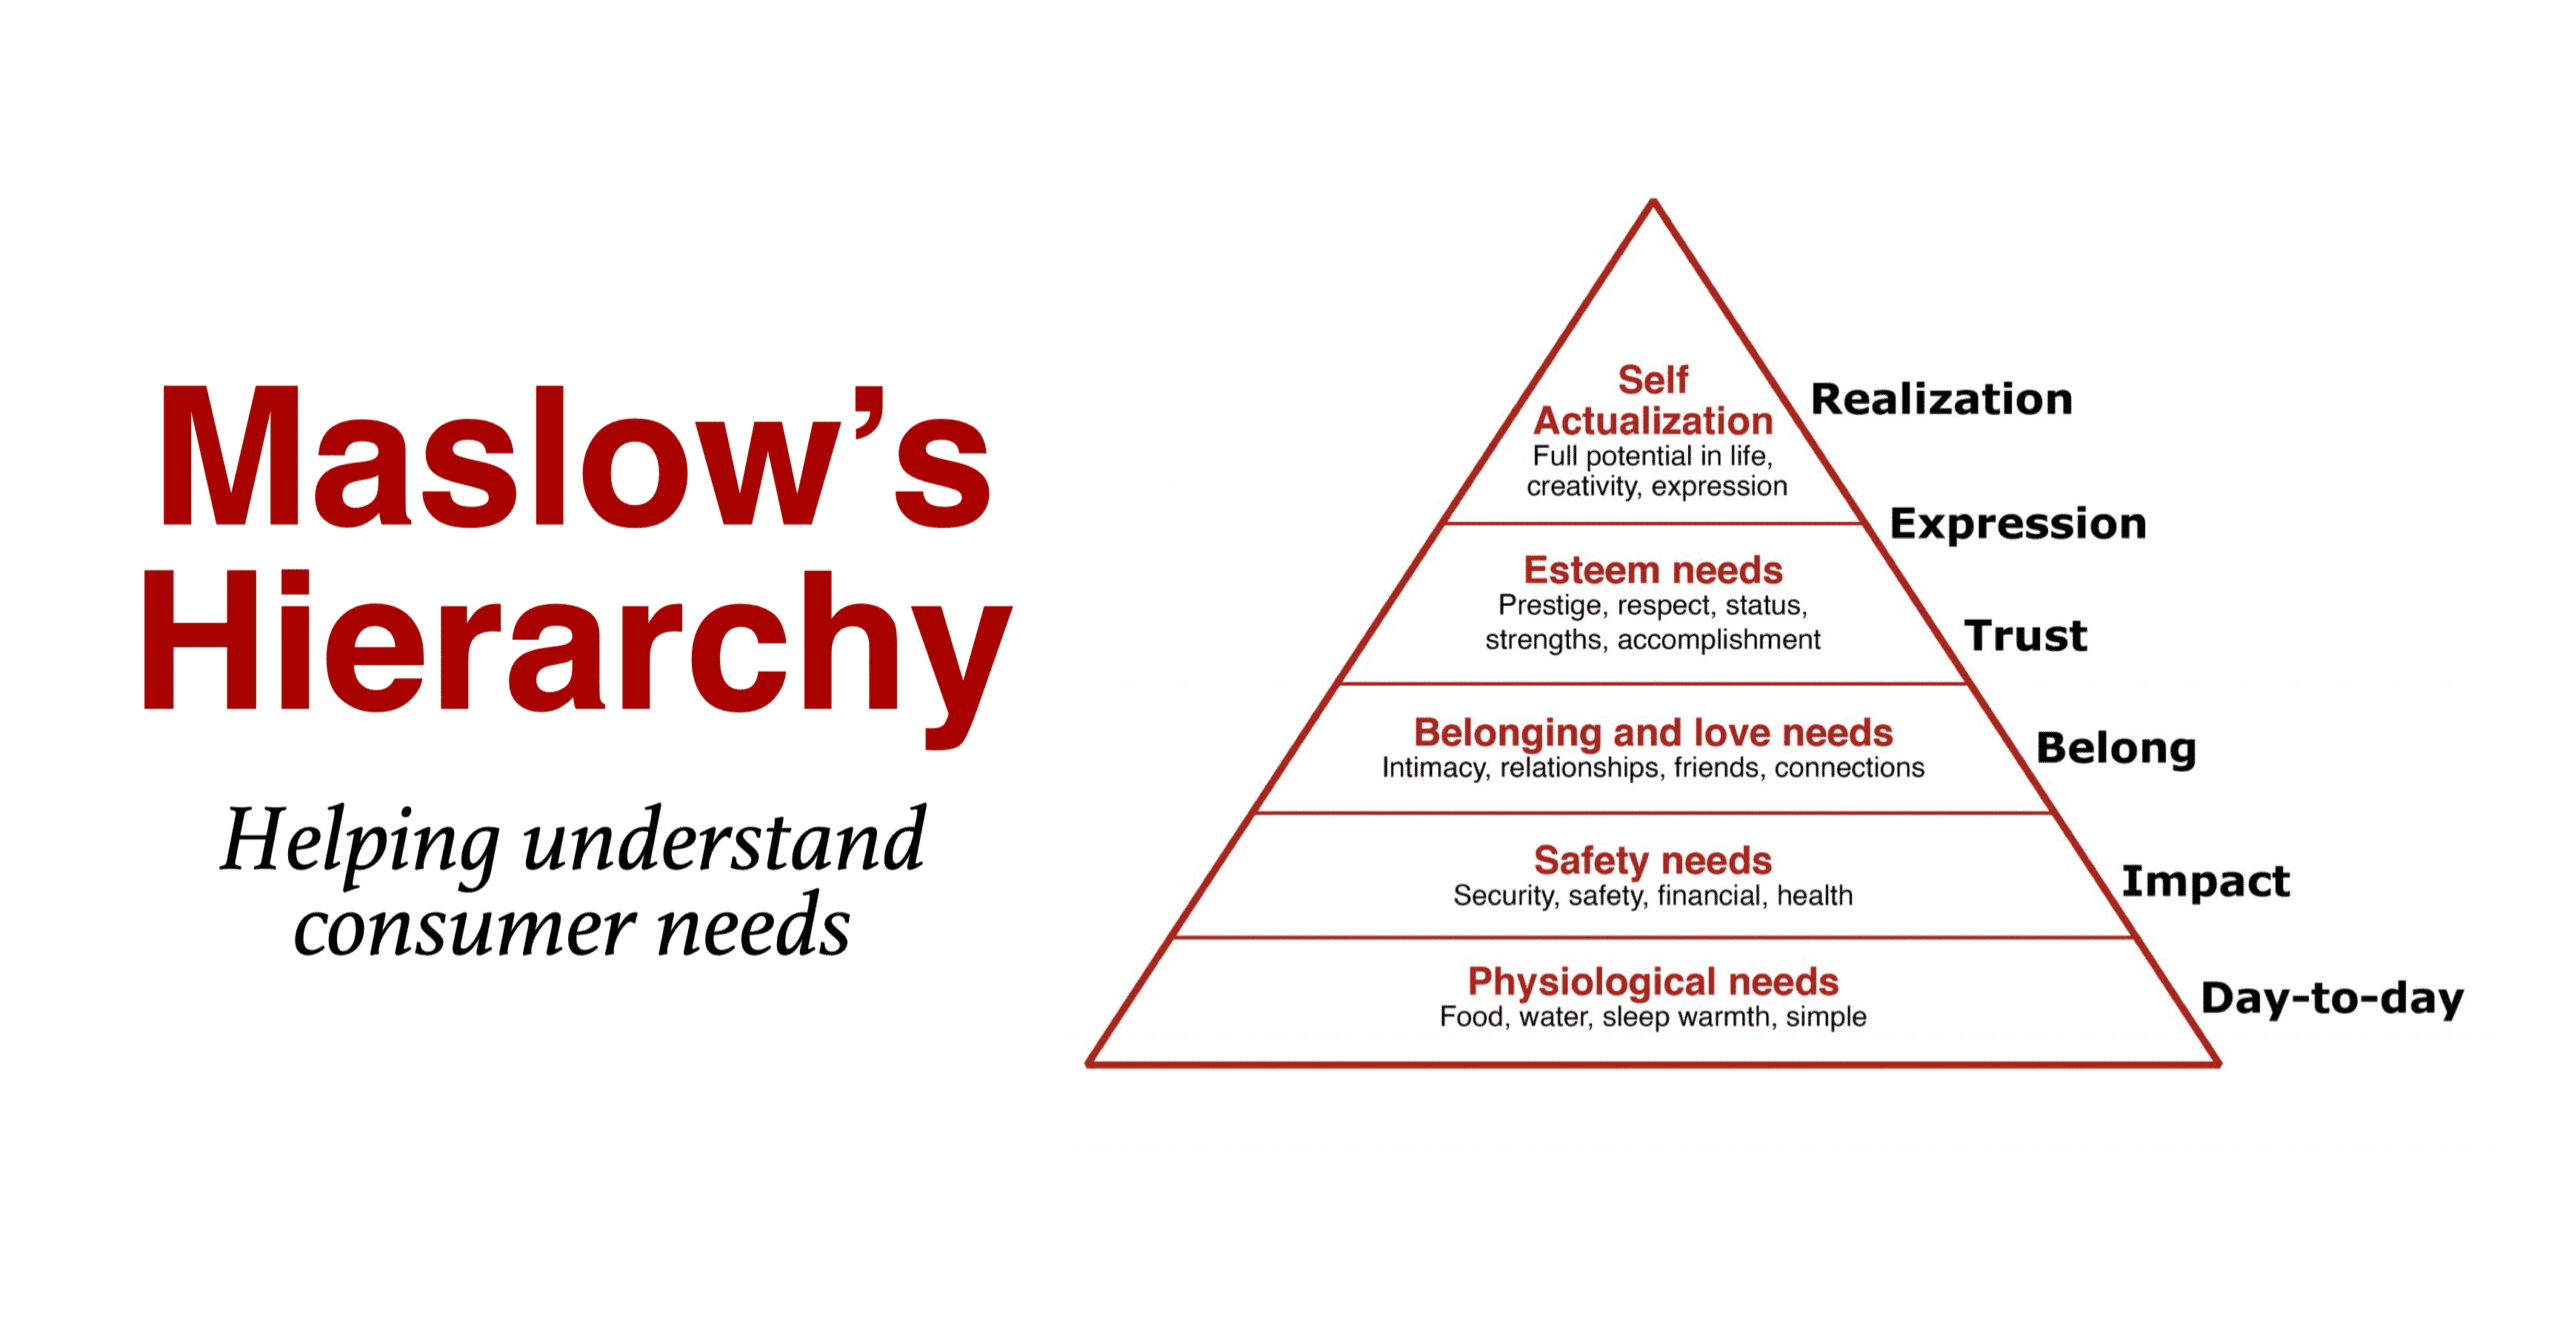 Maslow's Hierarchy to understand consumer needs